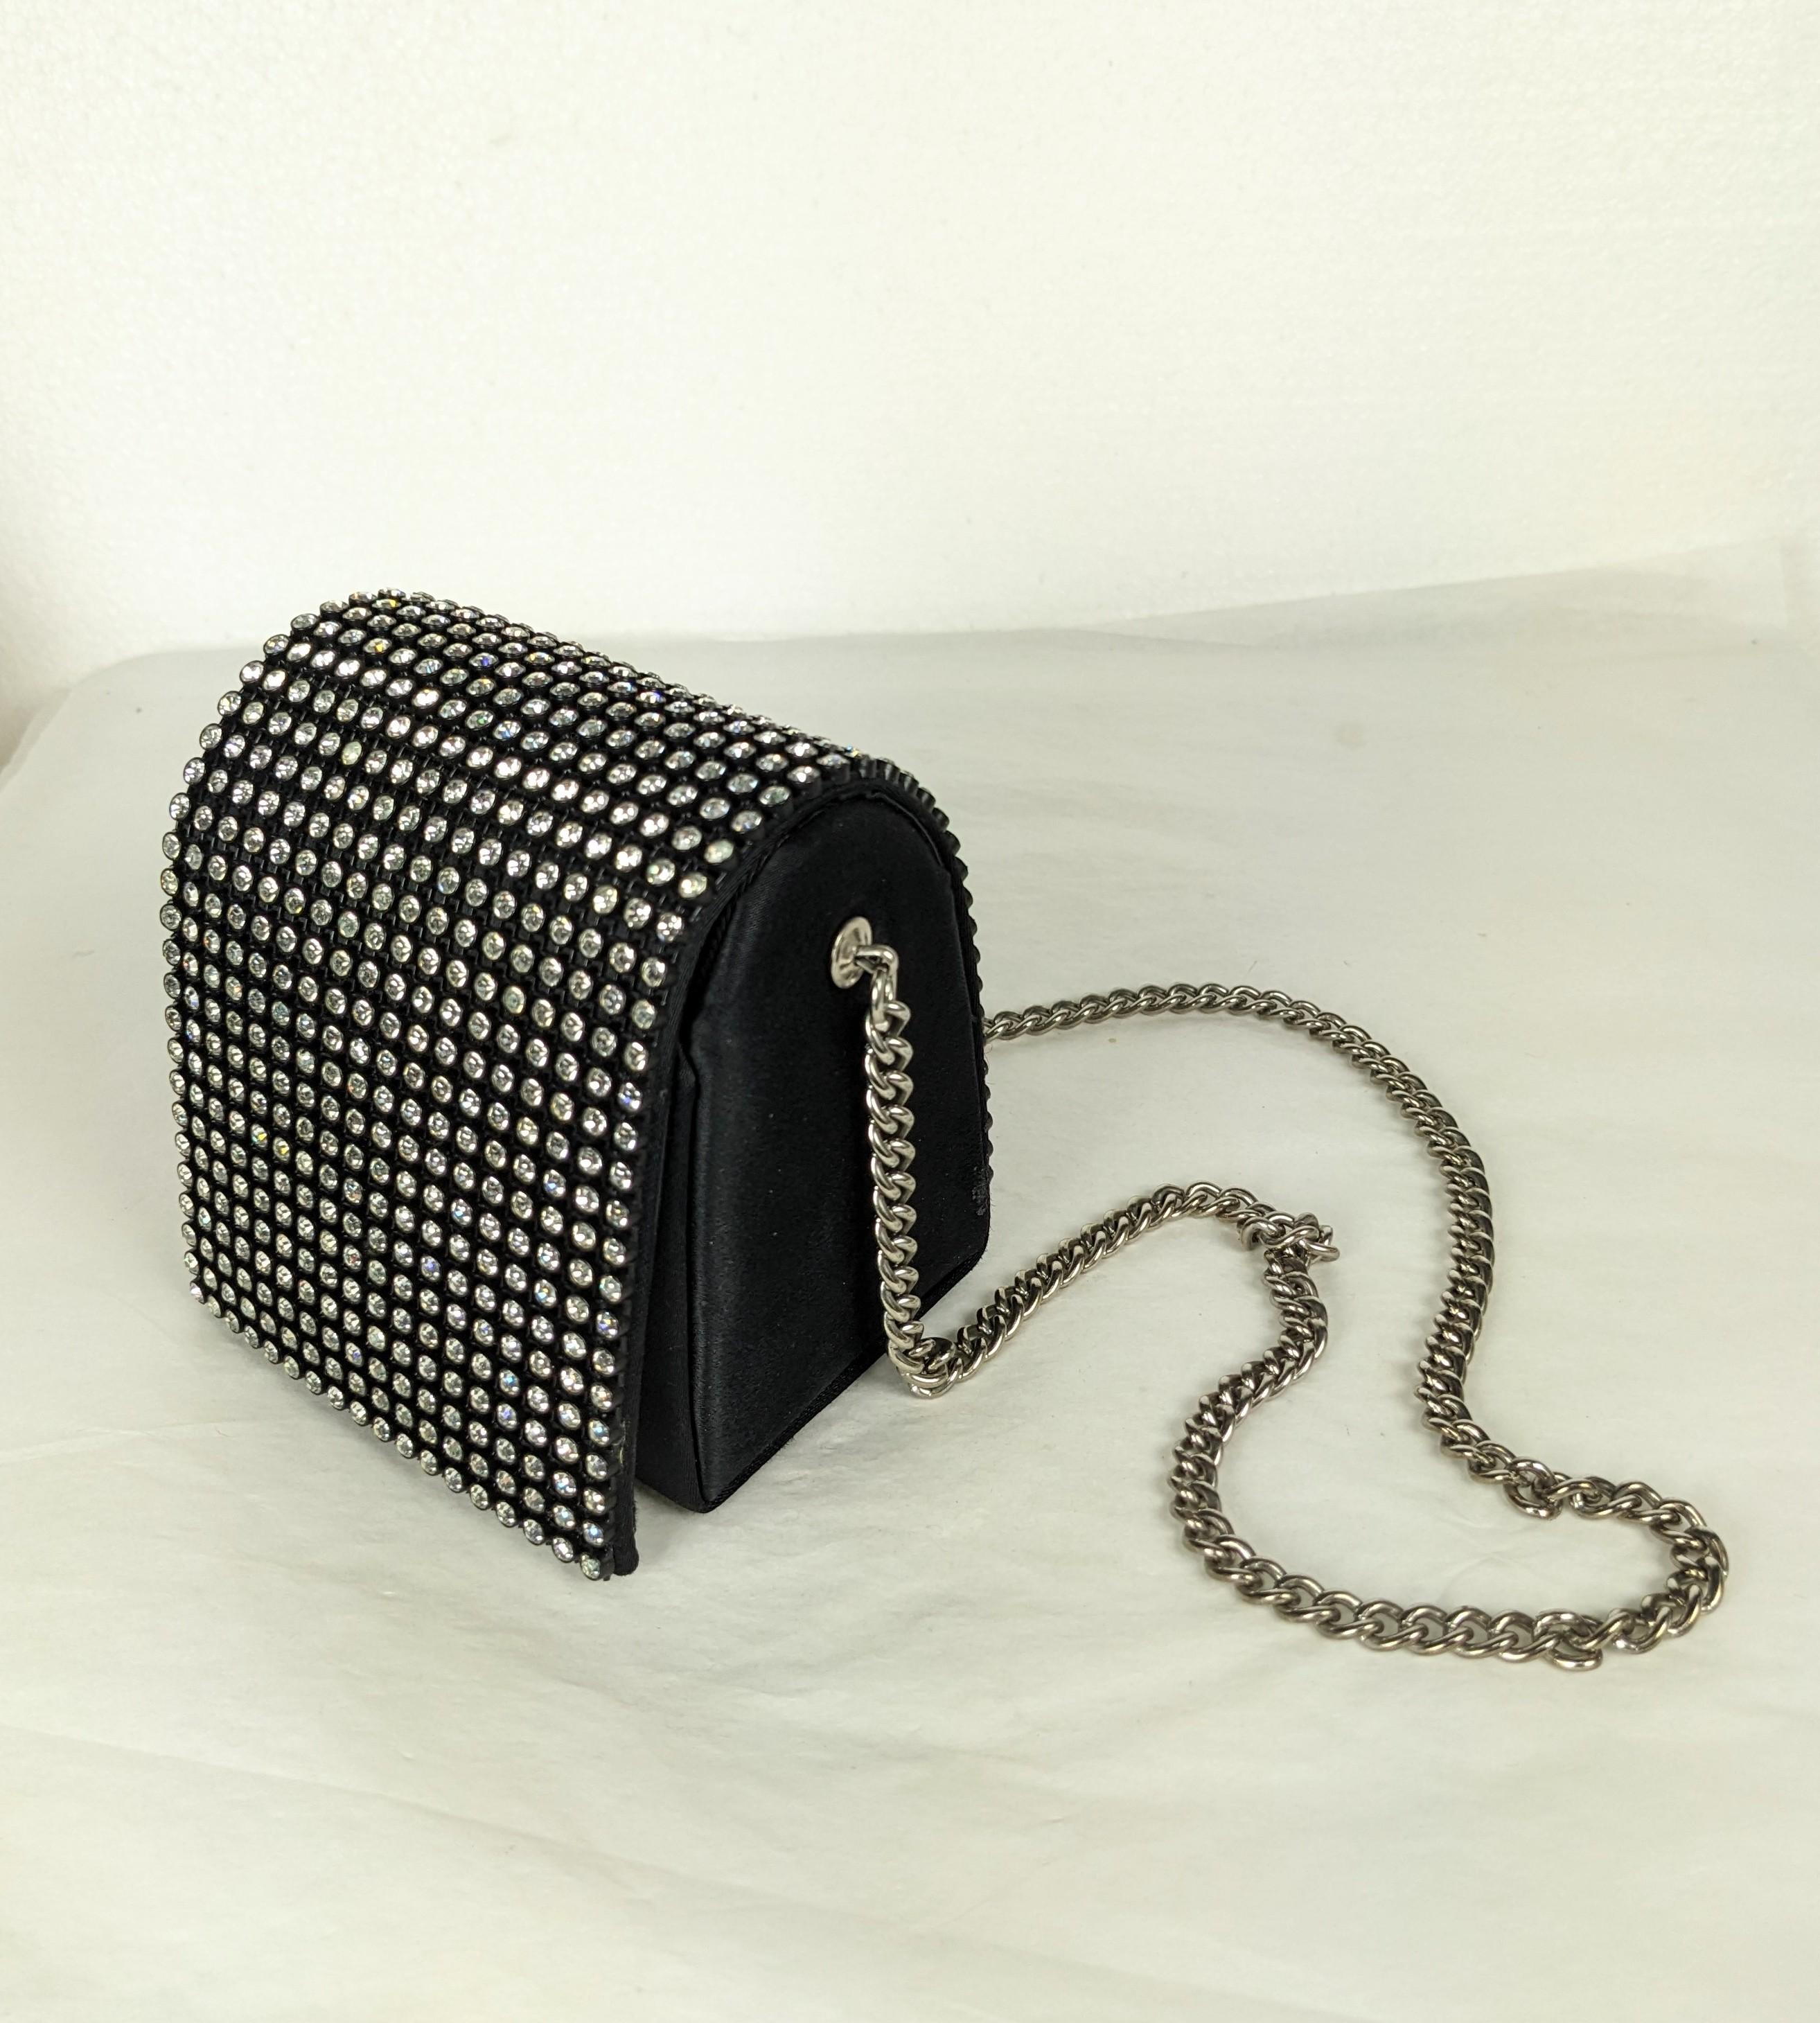 Charming Arnold Scassi Pave Mini Cube Novelty Bag from the 1960's which holds very little, maybe a lipstick, a flip phone and some tissues. Rhinestone trimmed flap, Satin exterior, faille lining. Silvertone chain. 1960's USA.  3.5